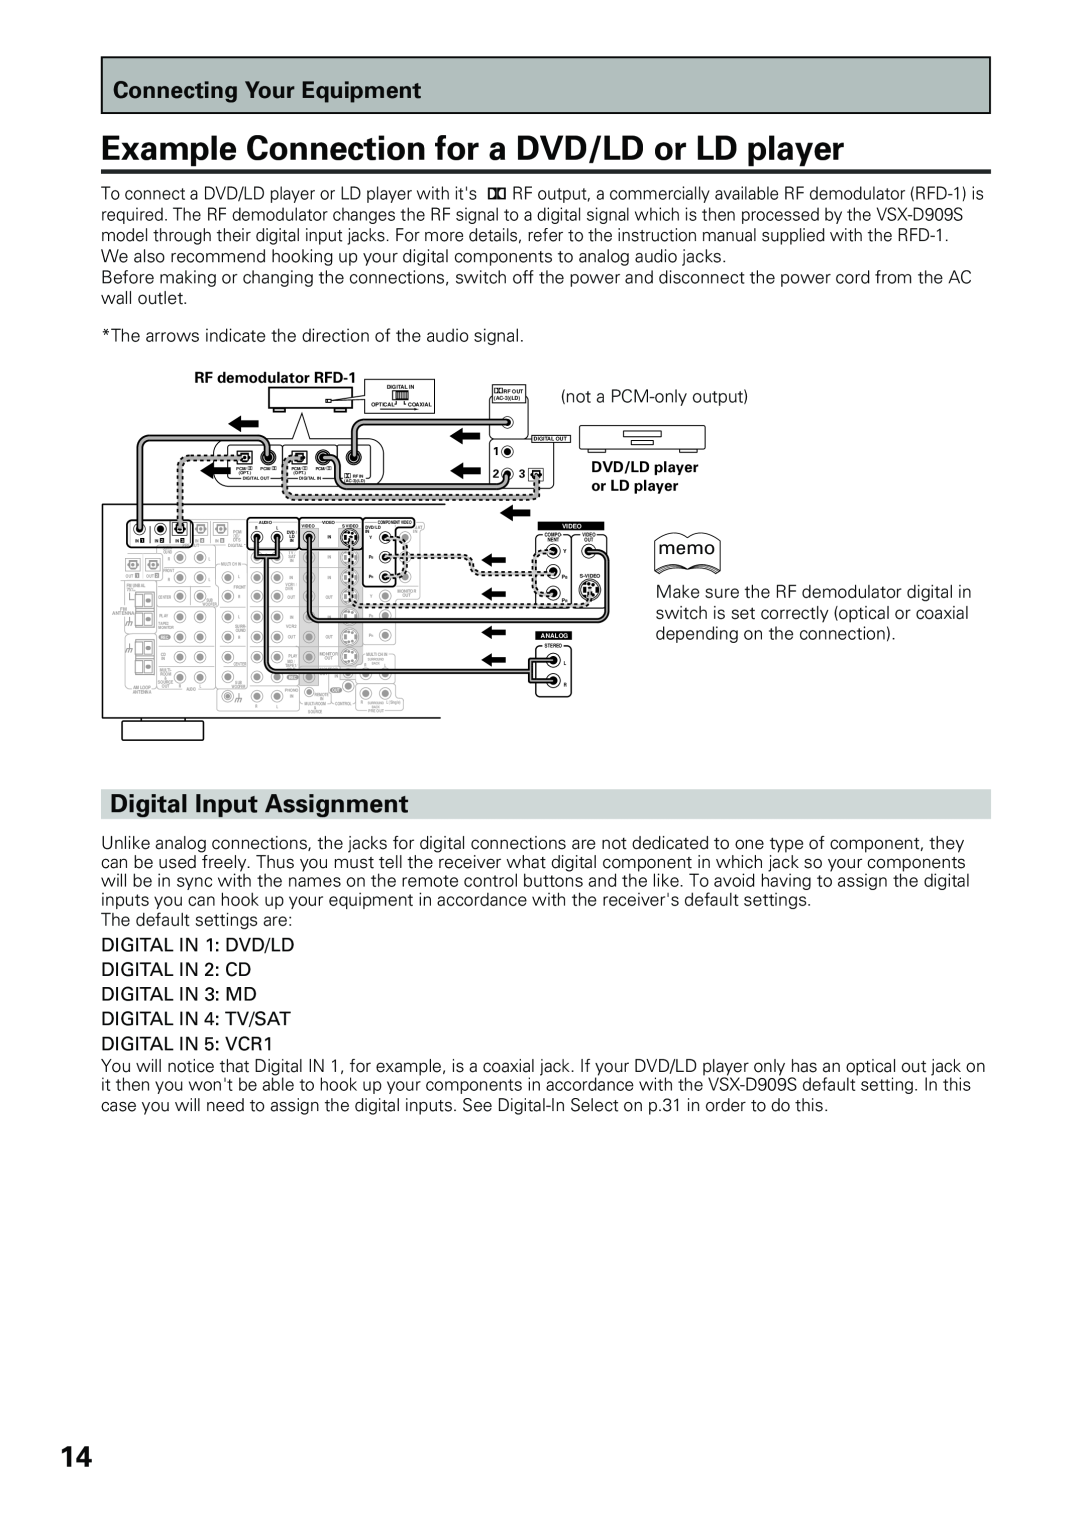 Pioneer VSX-D909S Example Connection for a DVD/LD or LD player, Digital Input Assignment, Connecting Your Equipment, memo 